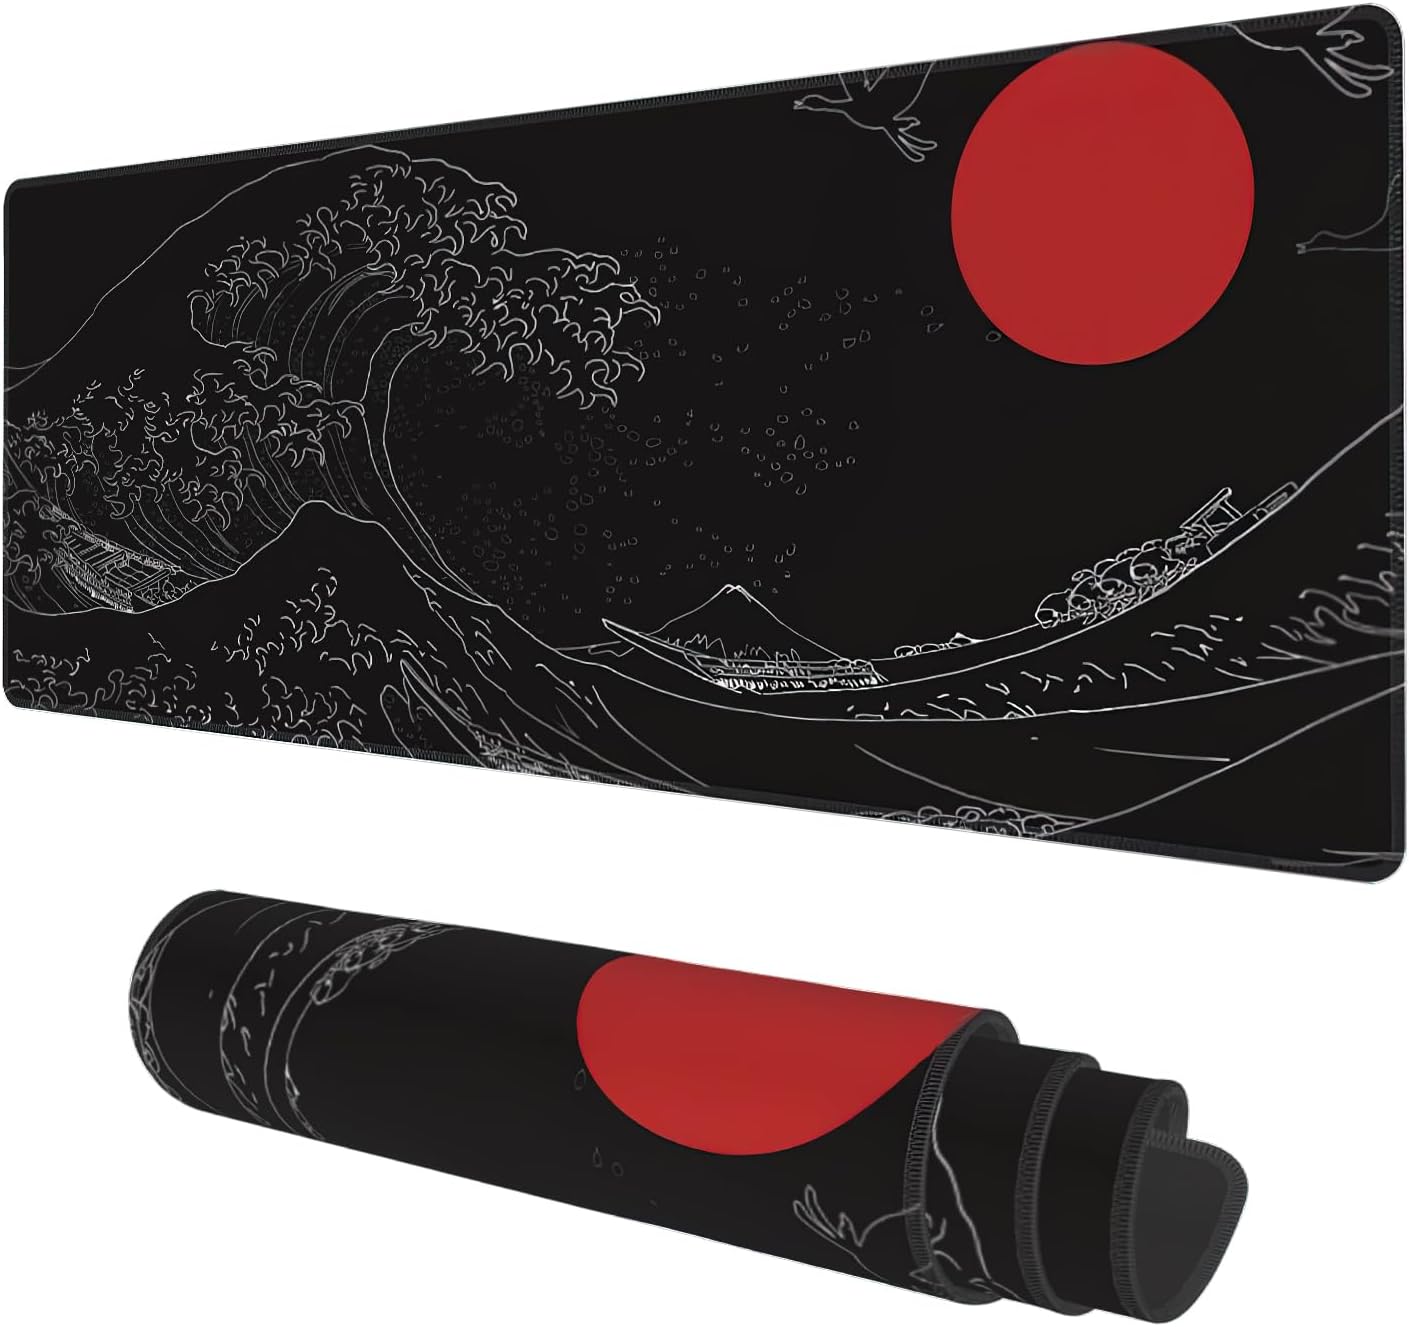 Desk Mat, Black Japanese Style Wave and Red Sun Extended Gaming Mouse Pad Large, 31.5x11.8 Big Mouse Pad with Non-Slip Base and Stitched Edge, Long Computer Keyboard Mouse Mat for Home Office Work